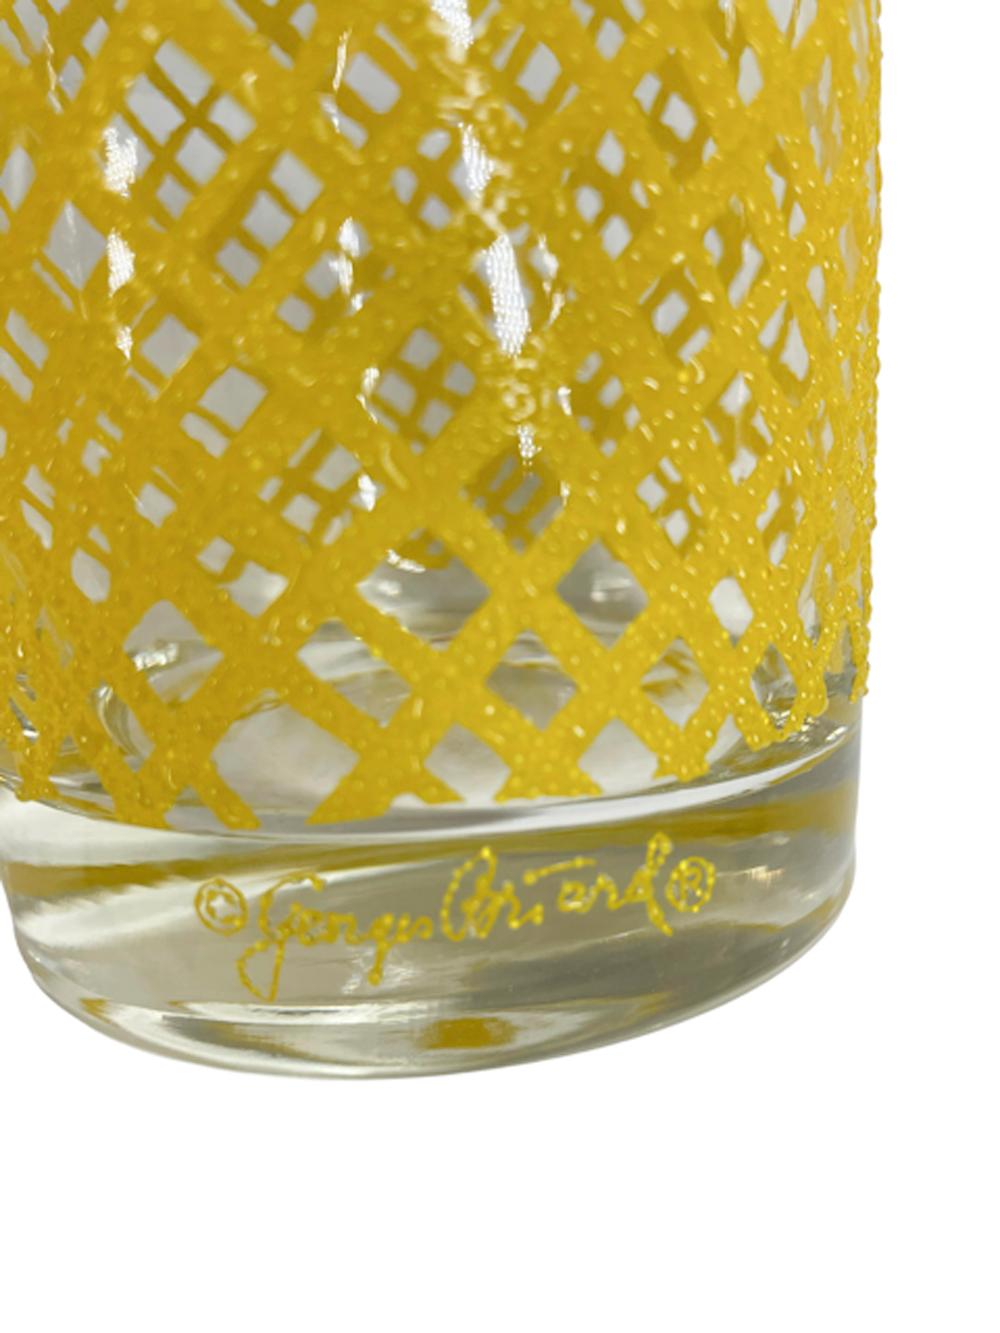 Mid-Century Modern Vintage Georges Briard Rocks Glasses w/Yellow Net Non-Slip Textured Surface For Sale